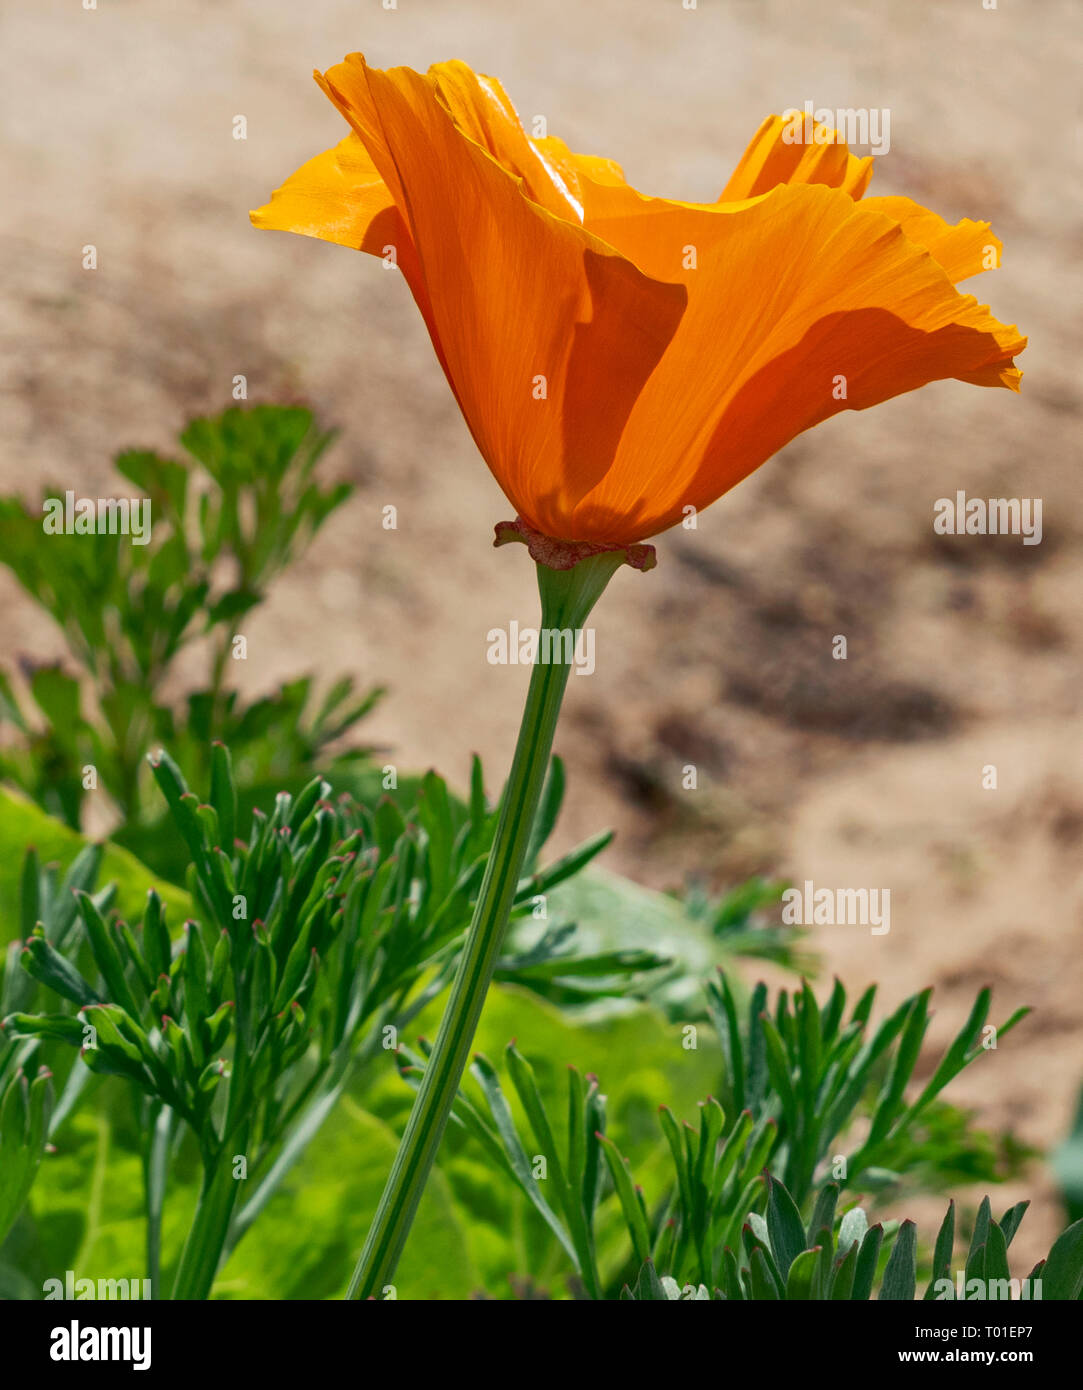 a golden orange california poppy pictured from the side with leaves and other vegetation at the base Stock Photo